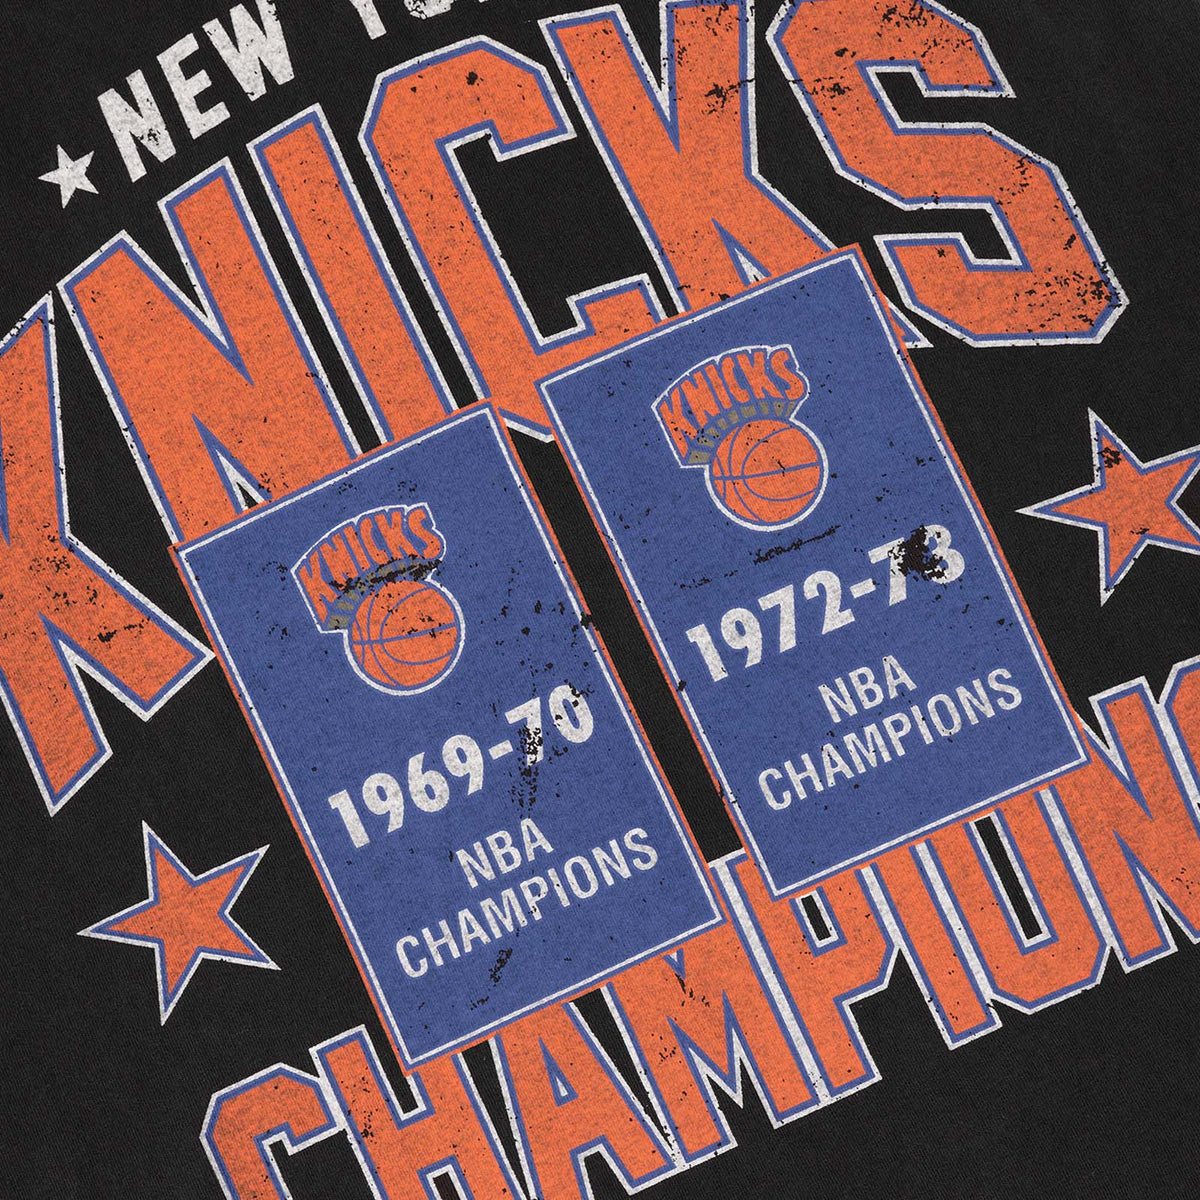 New York Knicks Champions Vintage Muscle Tank - Faded Black